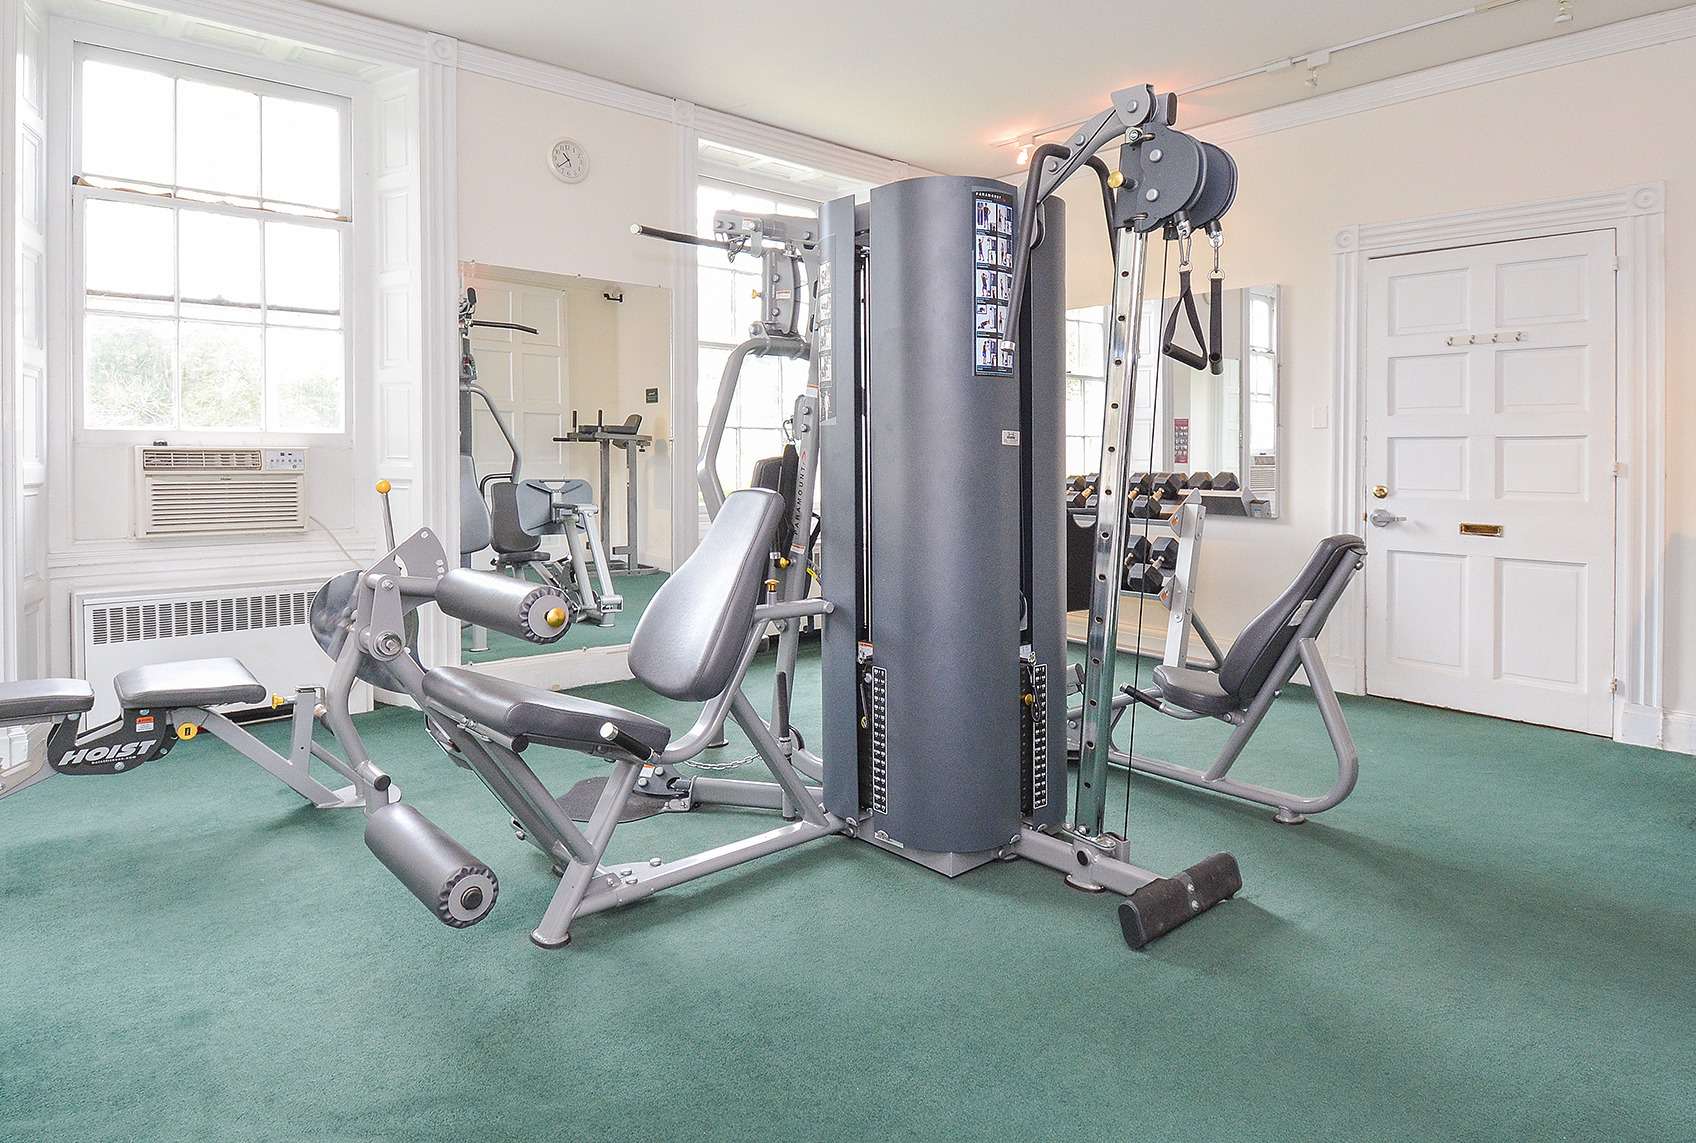 Indoor gym at Gulph Mills Village Apartments with windows, a mirror, and various workout equipment.